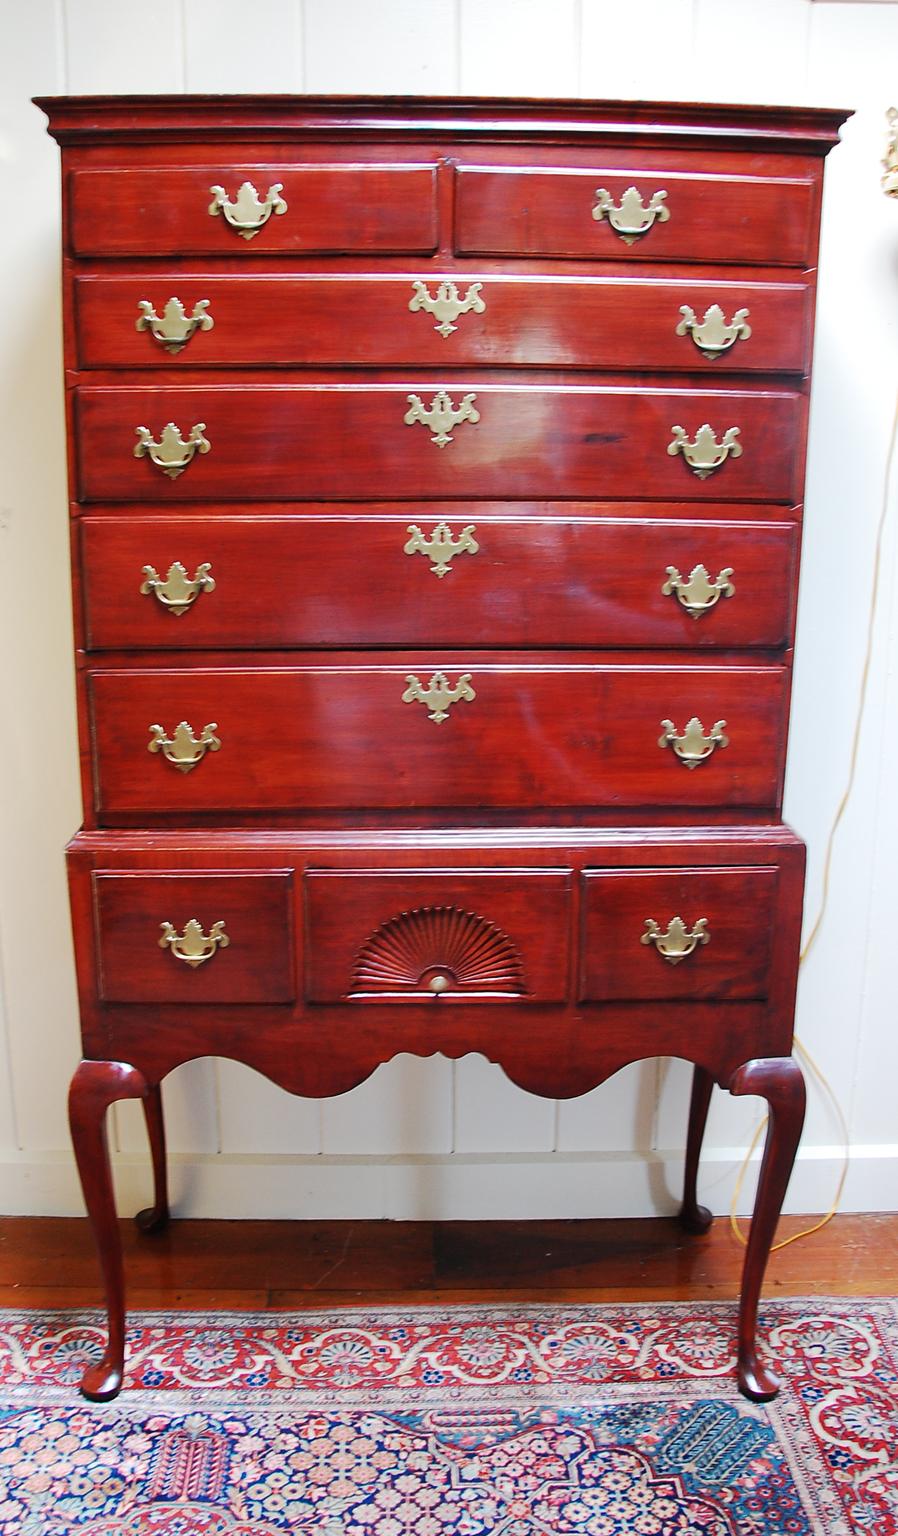 American Queen Anne maple highboy in two parts with cabriole legs, pad feet, fan carved central drawer and shaped skirt. This New England highboy is a classic with a flat top, molded cornice, elegant slender legs and edge molded drawers. The fan